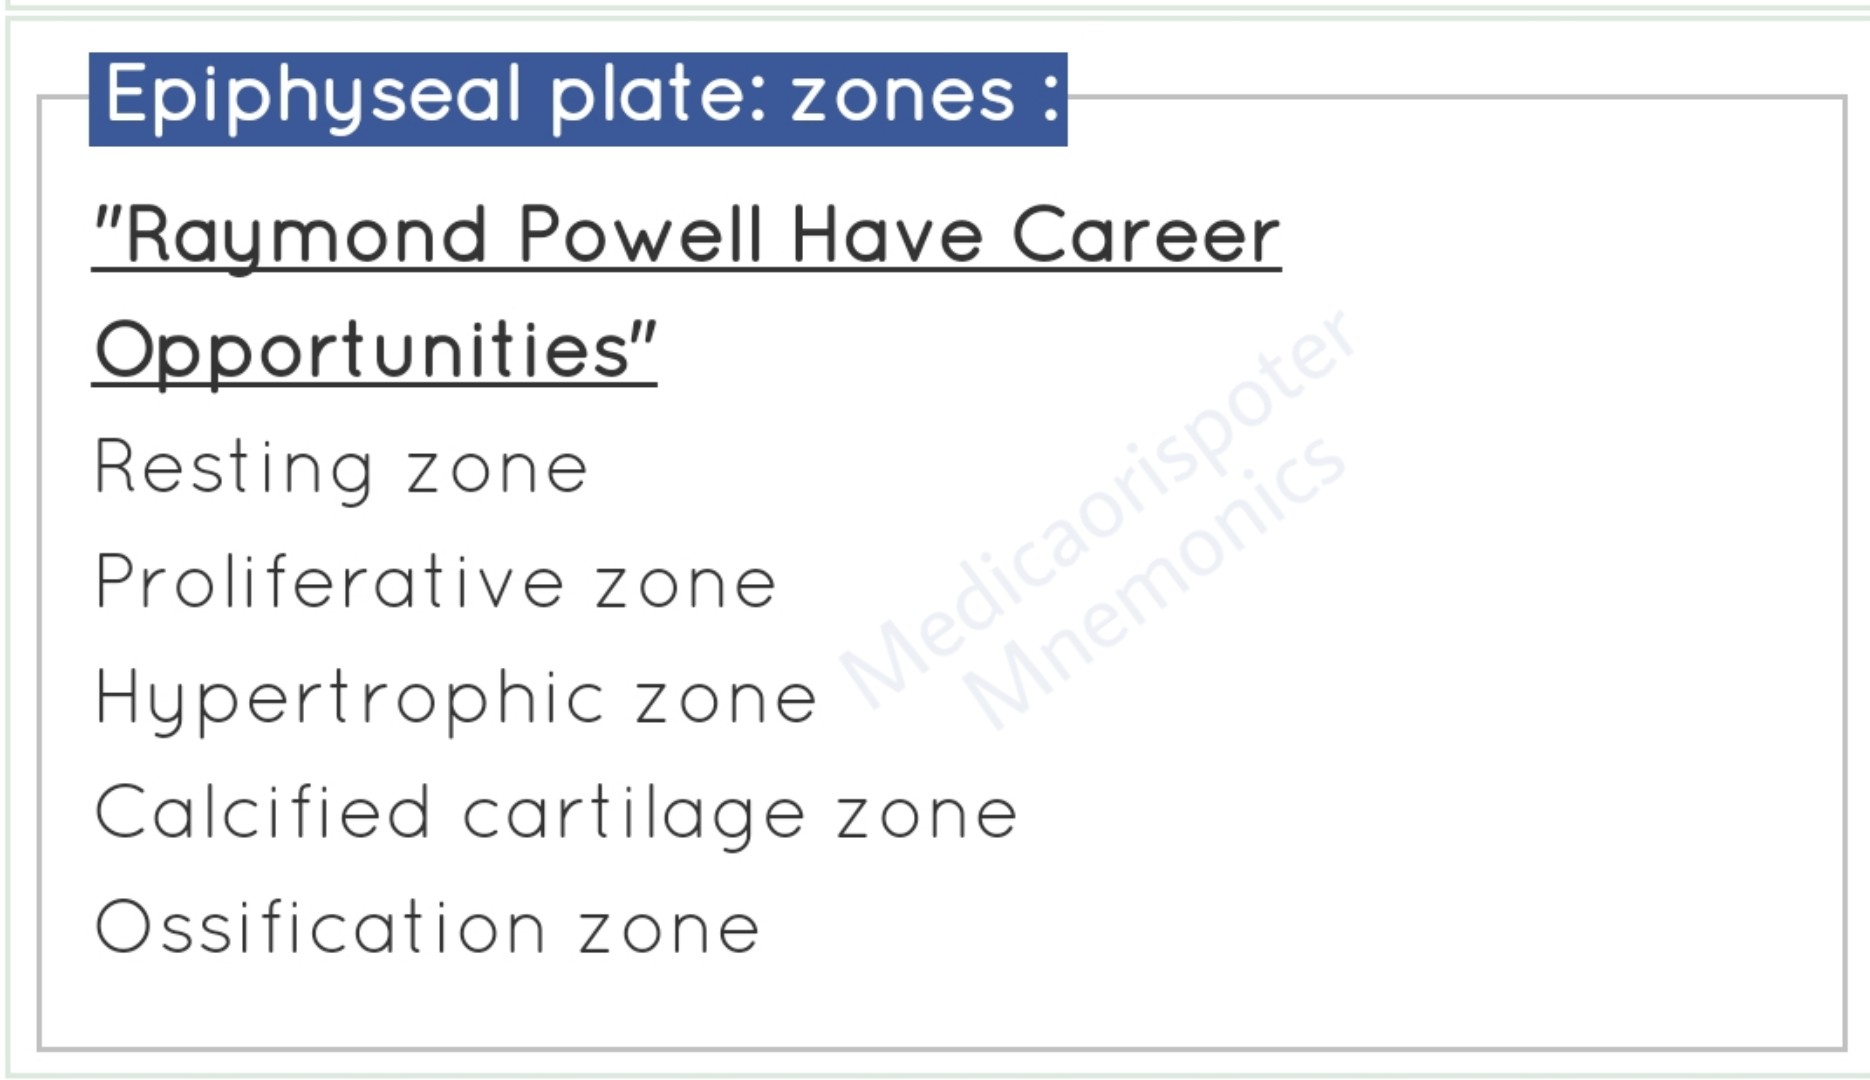 Zones of Epiphyseal Plate